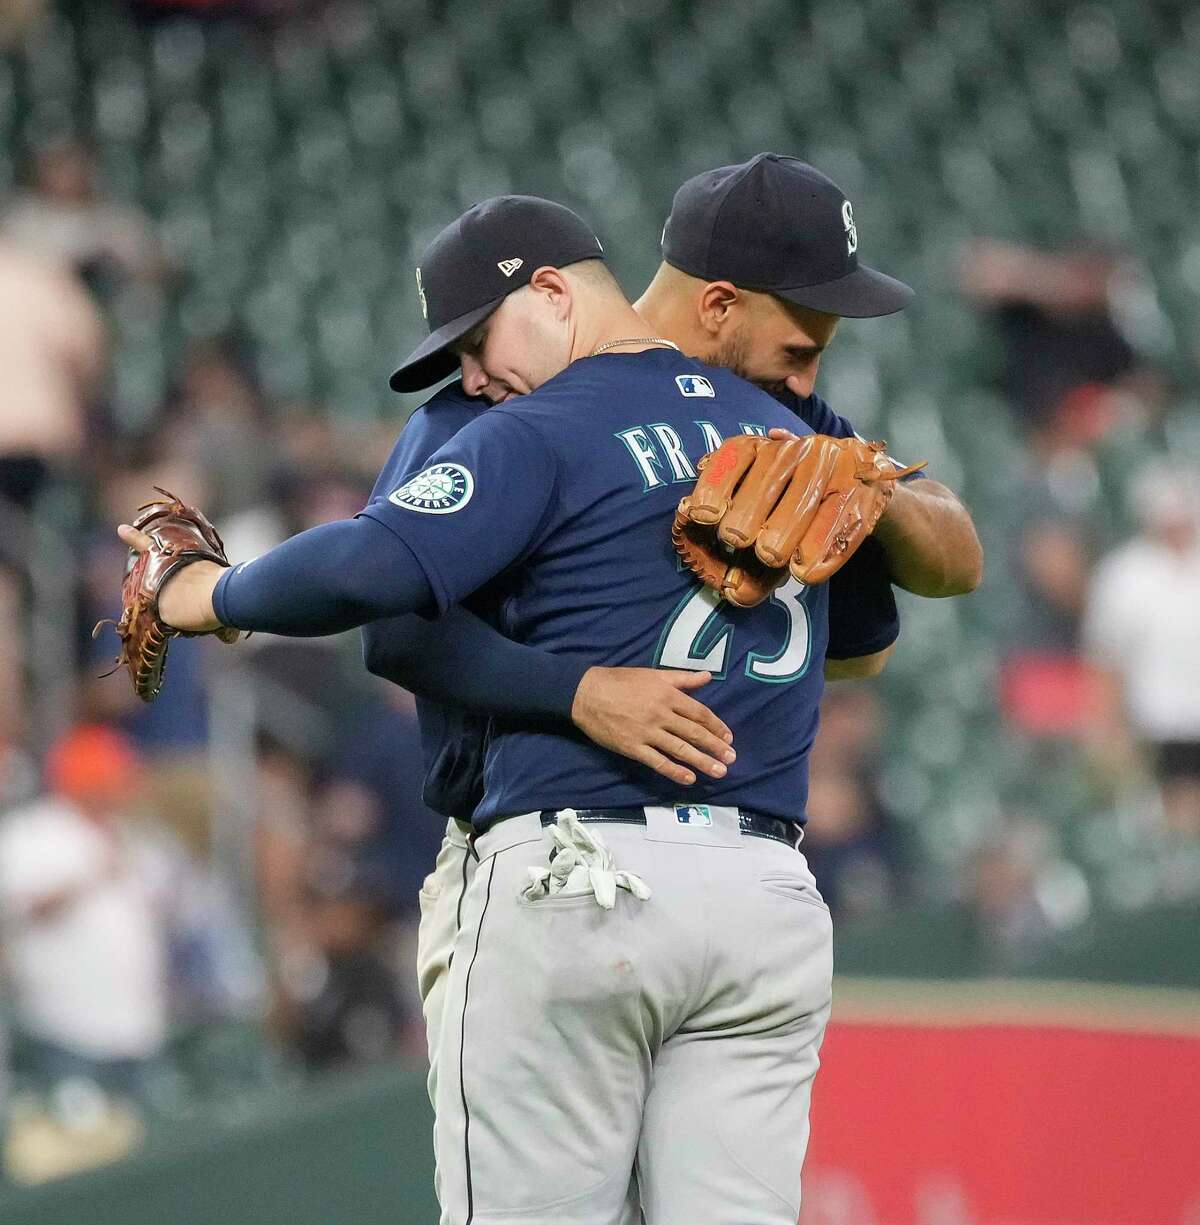 Seattle Mariners third baseman Abraham Toro (13) hugs Seattle Mariners first baseman Ty France (23) as they celebrate beating the Houston Astros 6-3 after a MLB game at Minute Maid Park on Wednesday, June 8, 2022 in Houston.